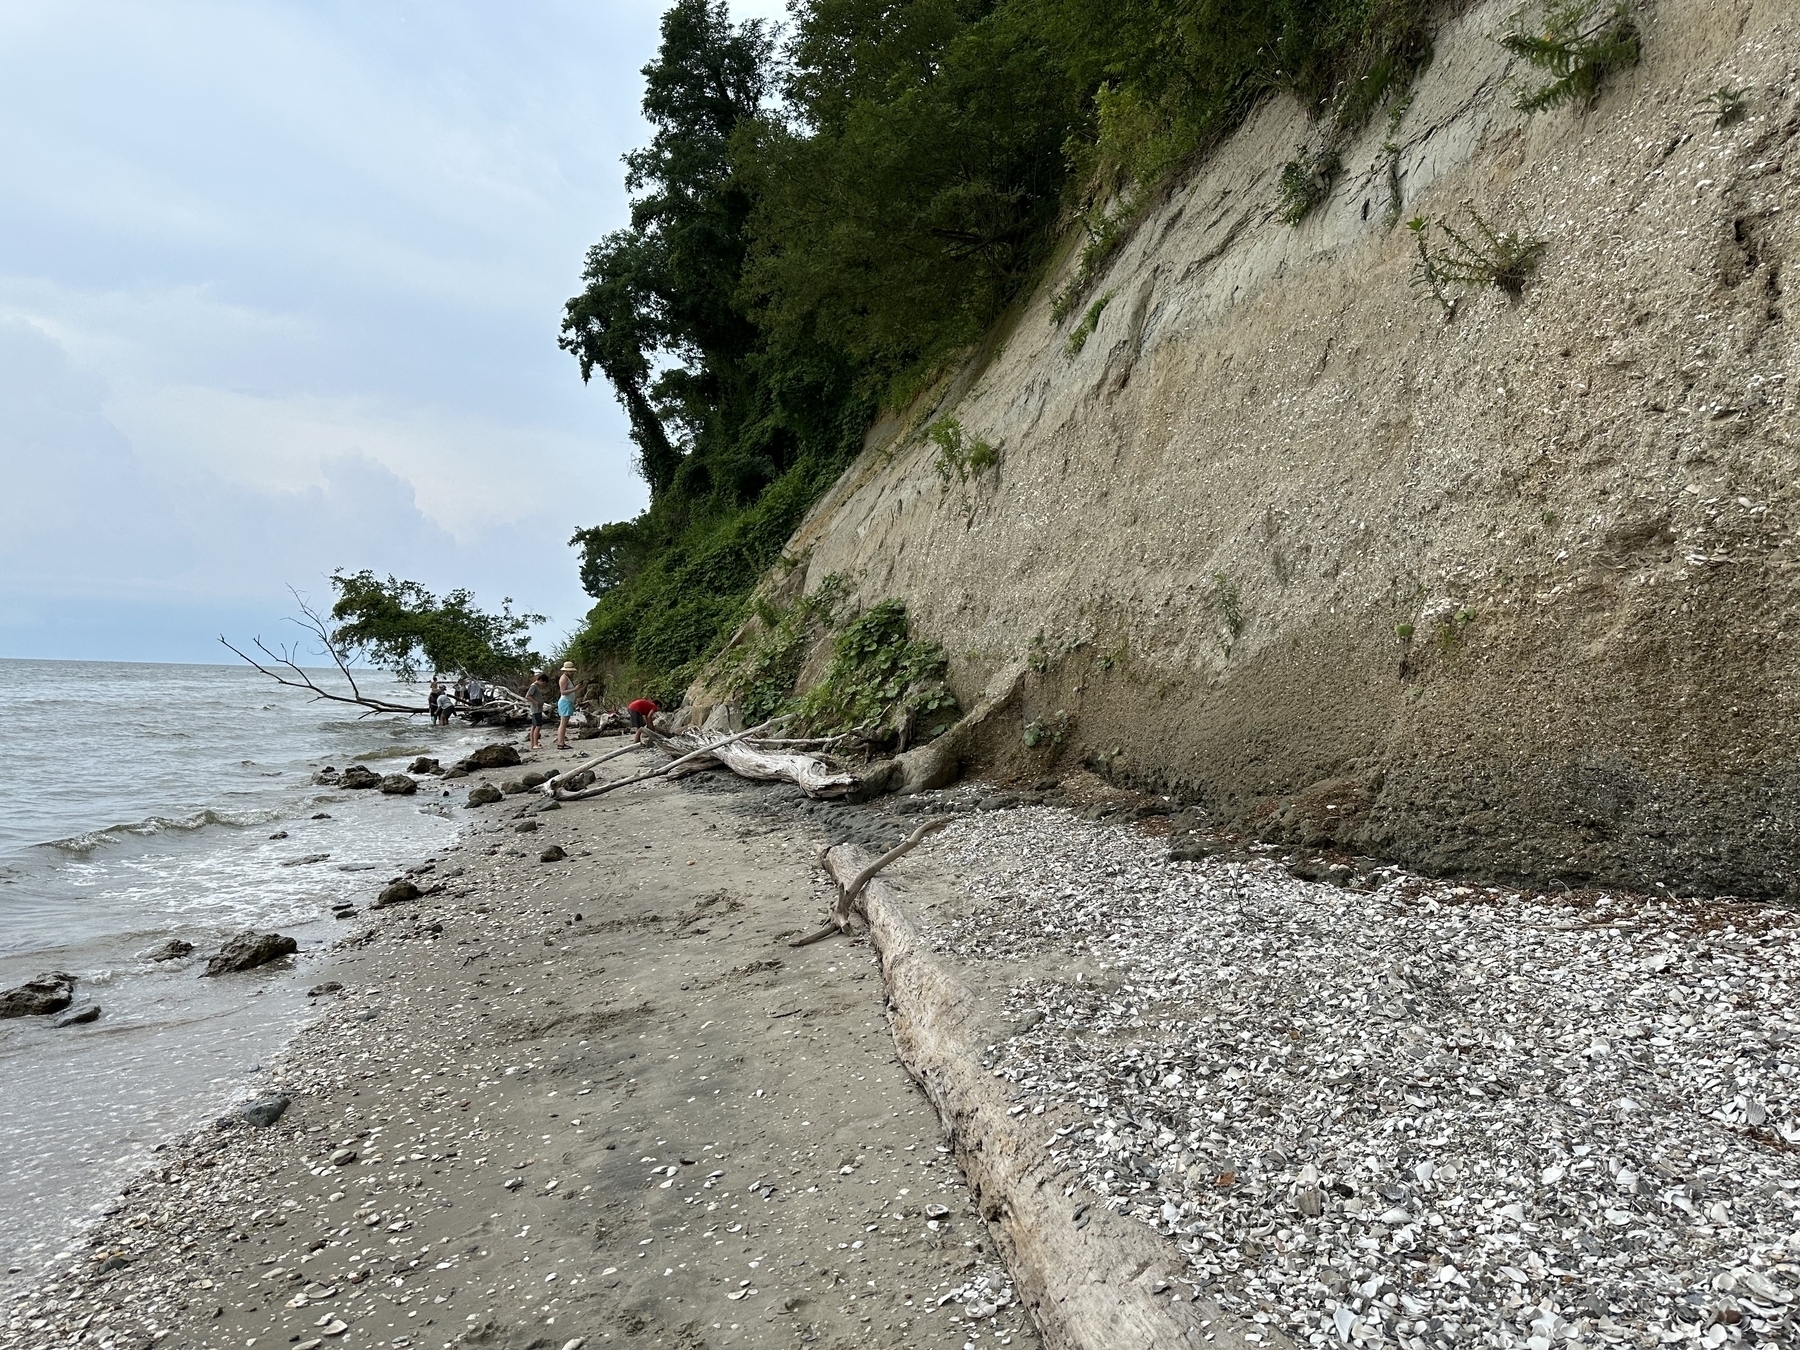 A small beach nestled underneath a cliff, covered with shards of fossilized shells.